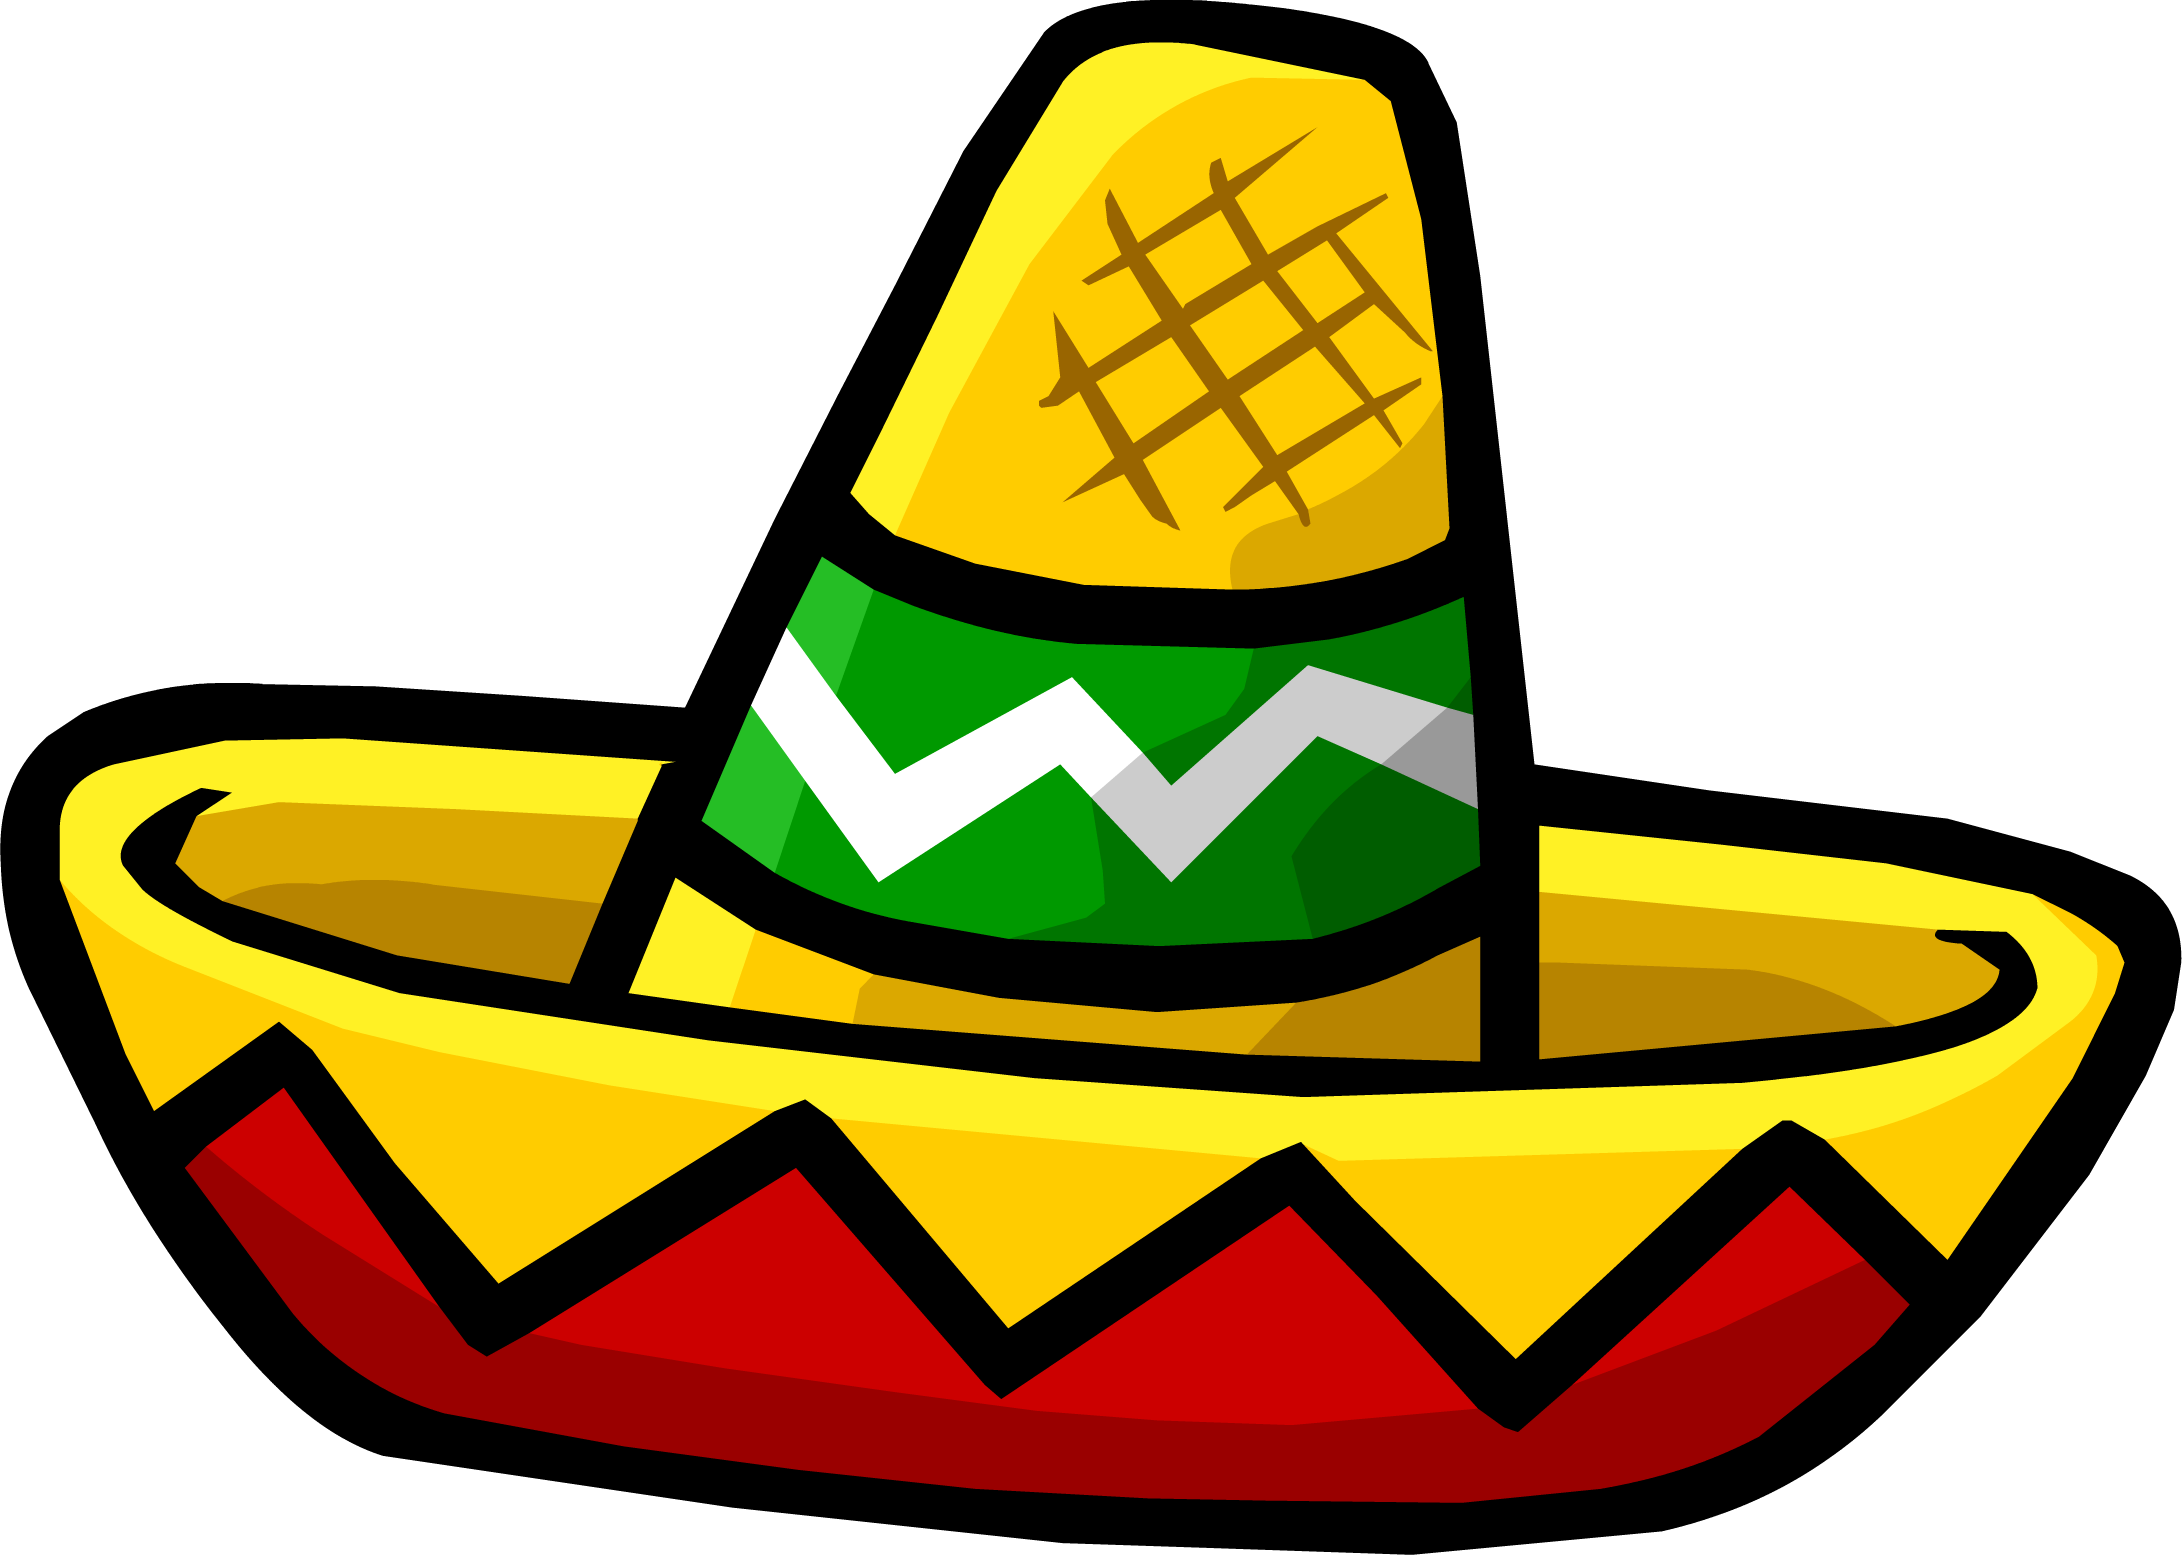 free vector mexican clipart - photo #26